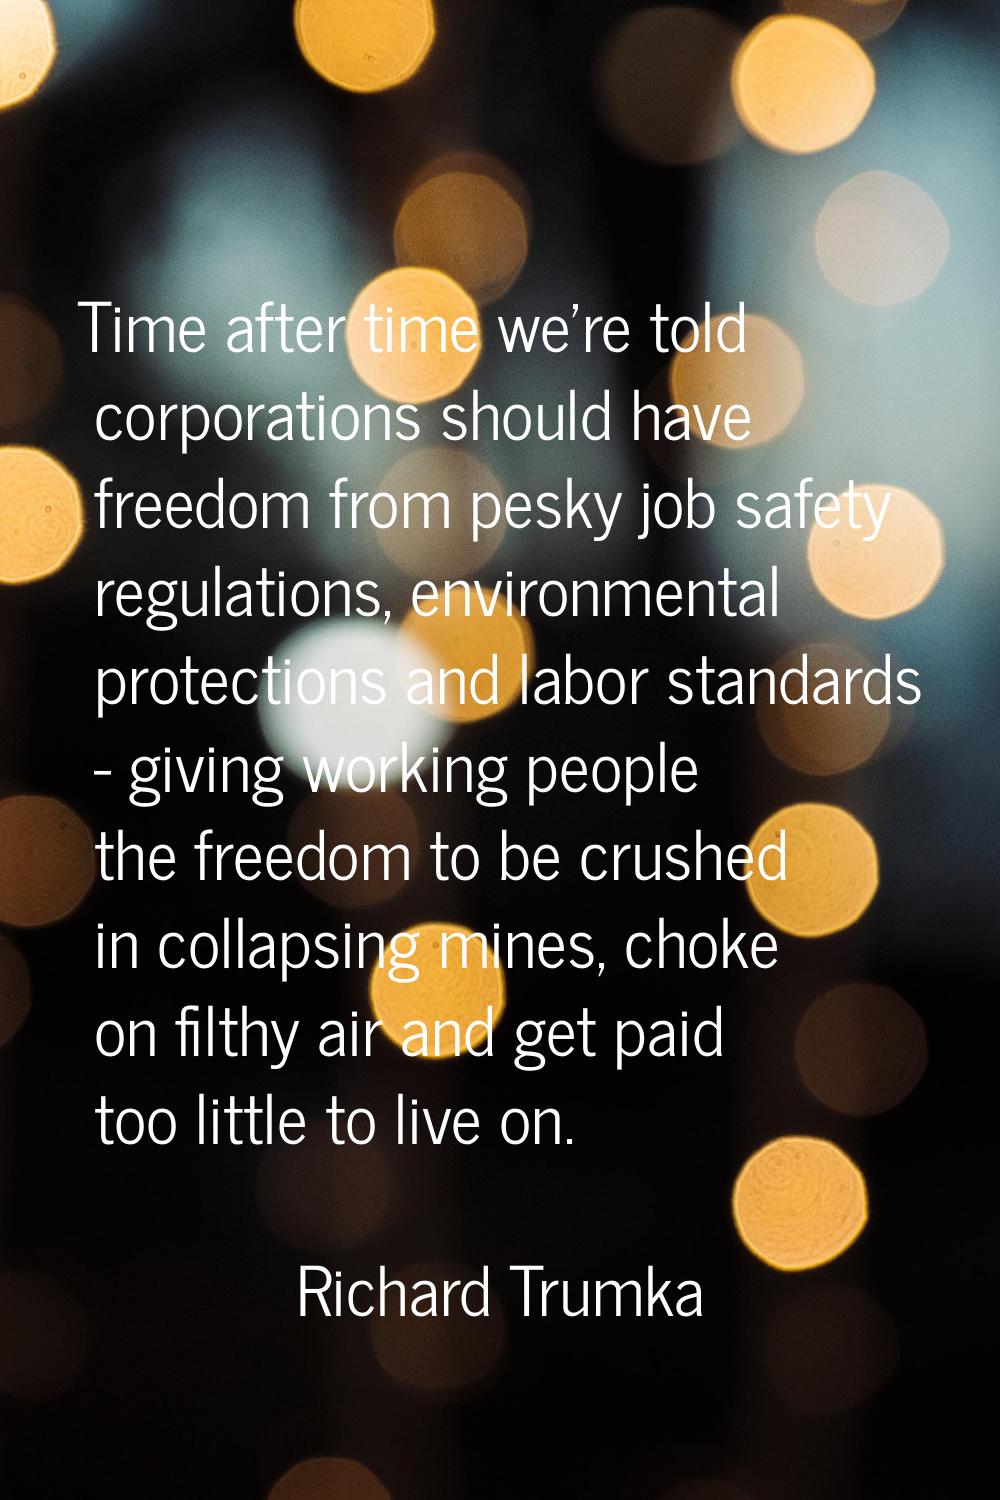 Time after time we're told corporations should have freedom from pesky job safety regulations, envi